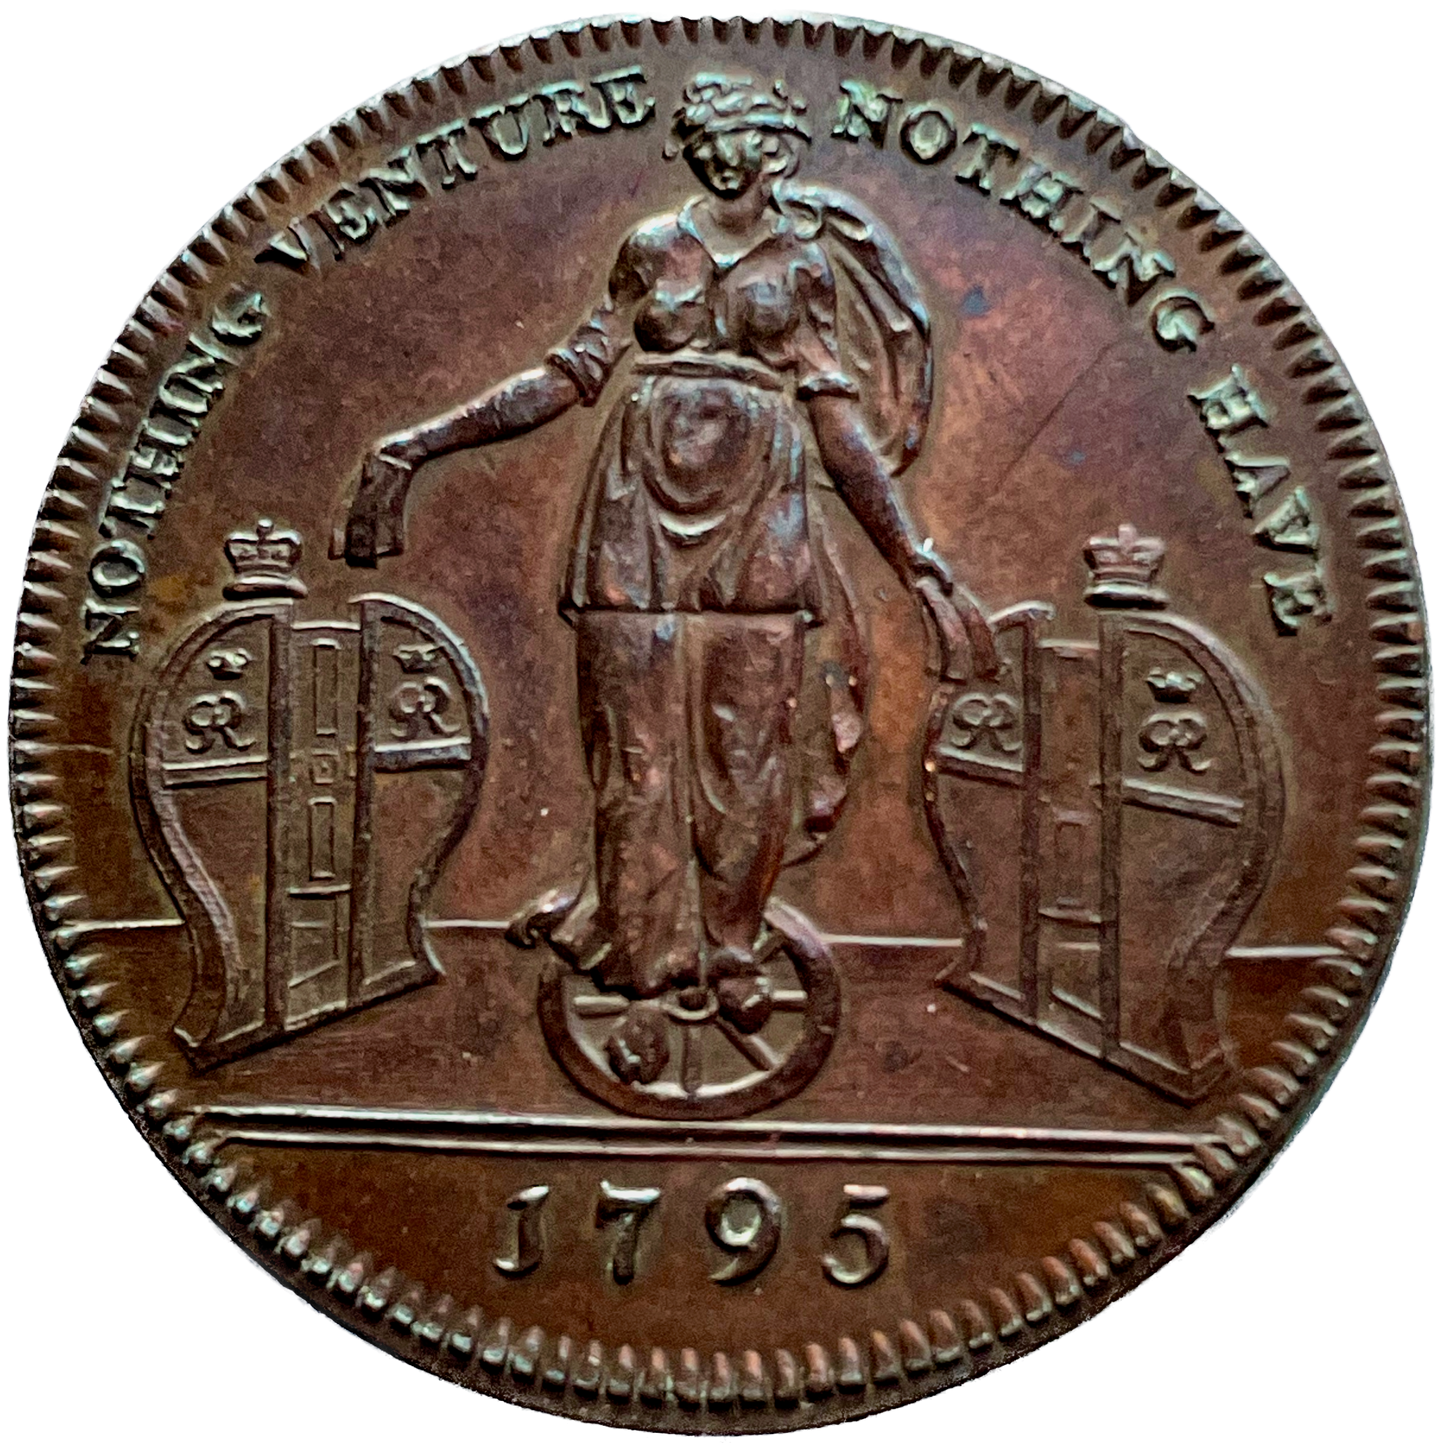 Middlesex D&H 467 Richardson's 1795 Conder Halfpenny